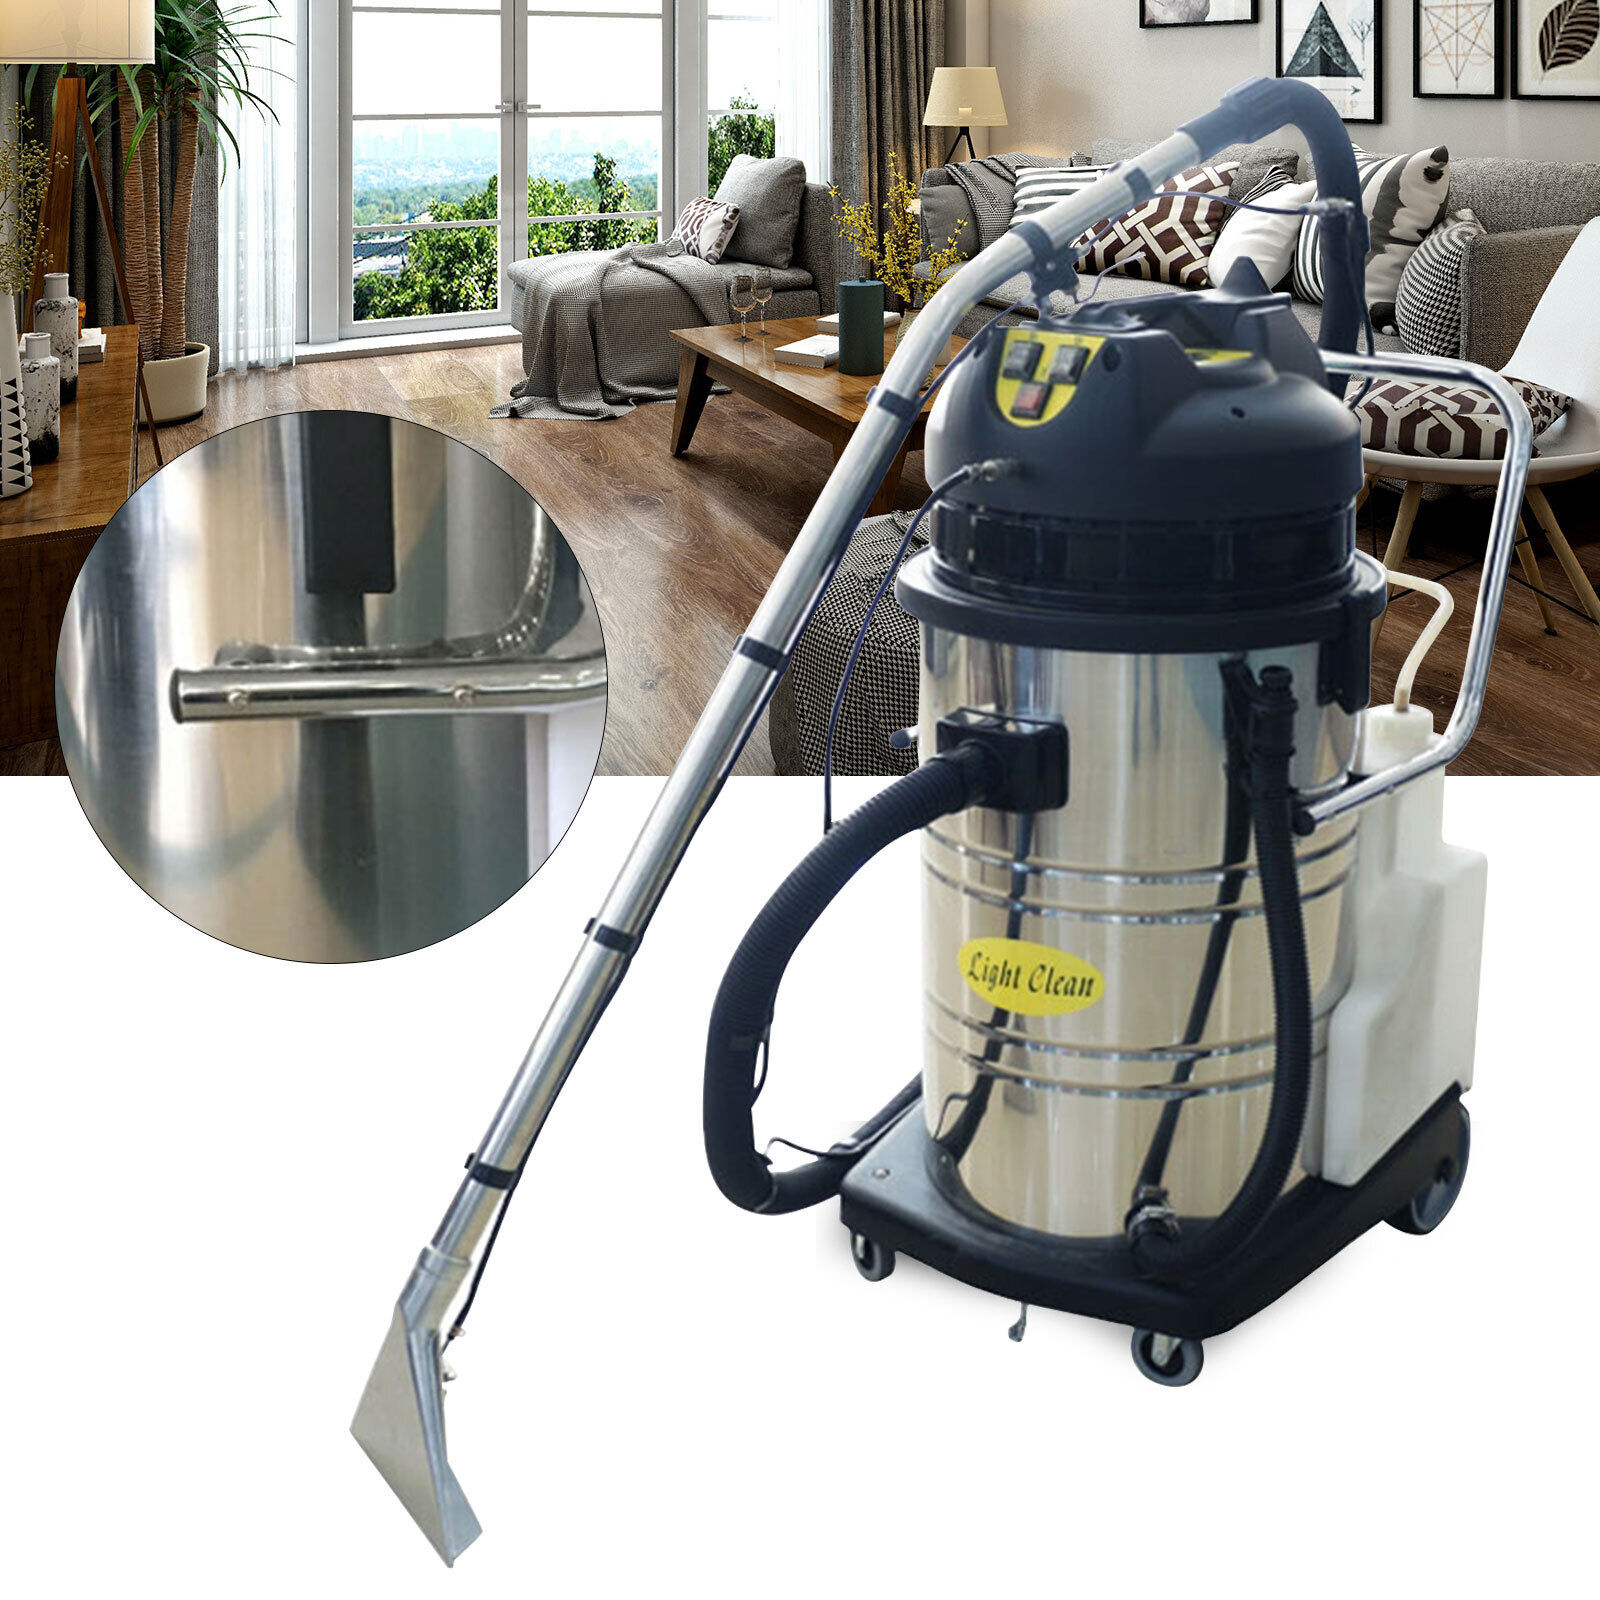 60L Commercial Carpet Cleaner Machine Cleaning Extractor Vacuum Suction Cleaner